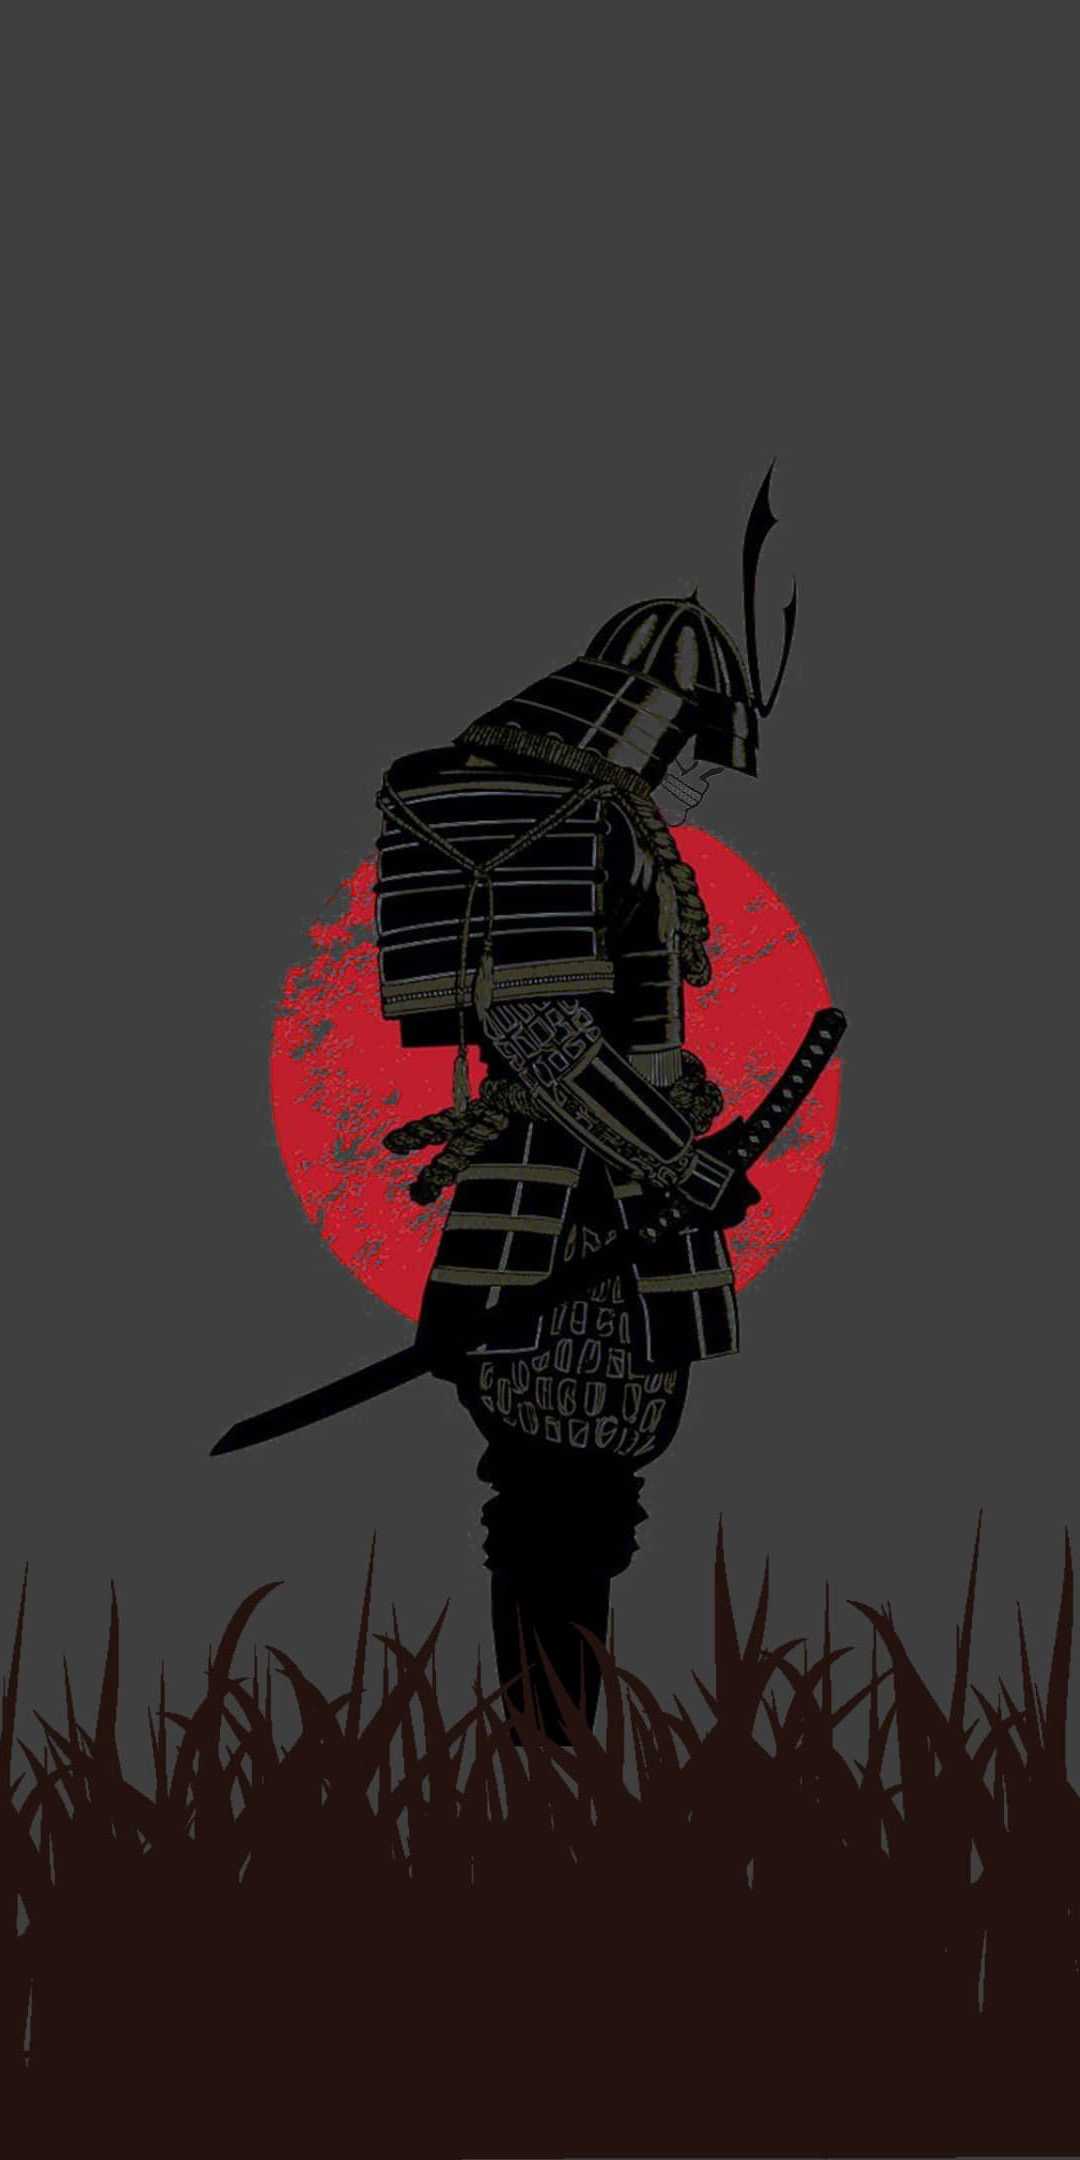 Samurai wallpaper for android phone with high-resolution 1080x1920 pixel. You can use this wallpaper for your Android backgrounds, Tablet, Samsung Galaxy backgrounds, Mobile Screens, iPhone or iPad backgrounds, lock screen, tablet, and another mobile phone device - Samurai